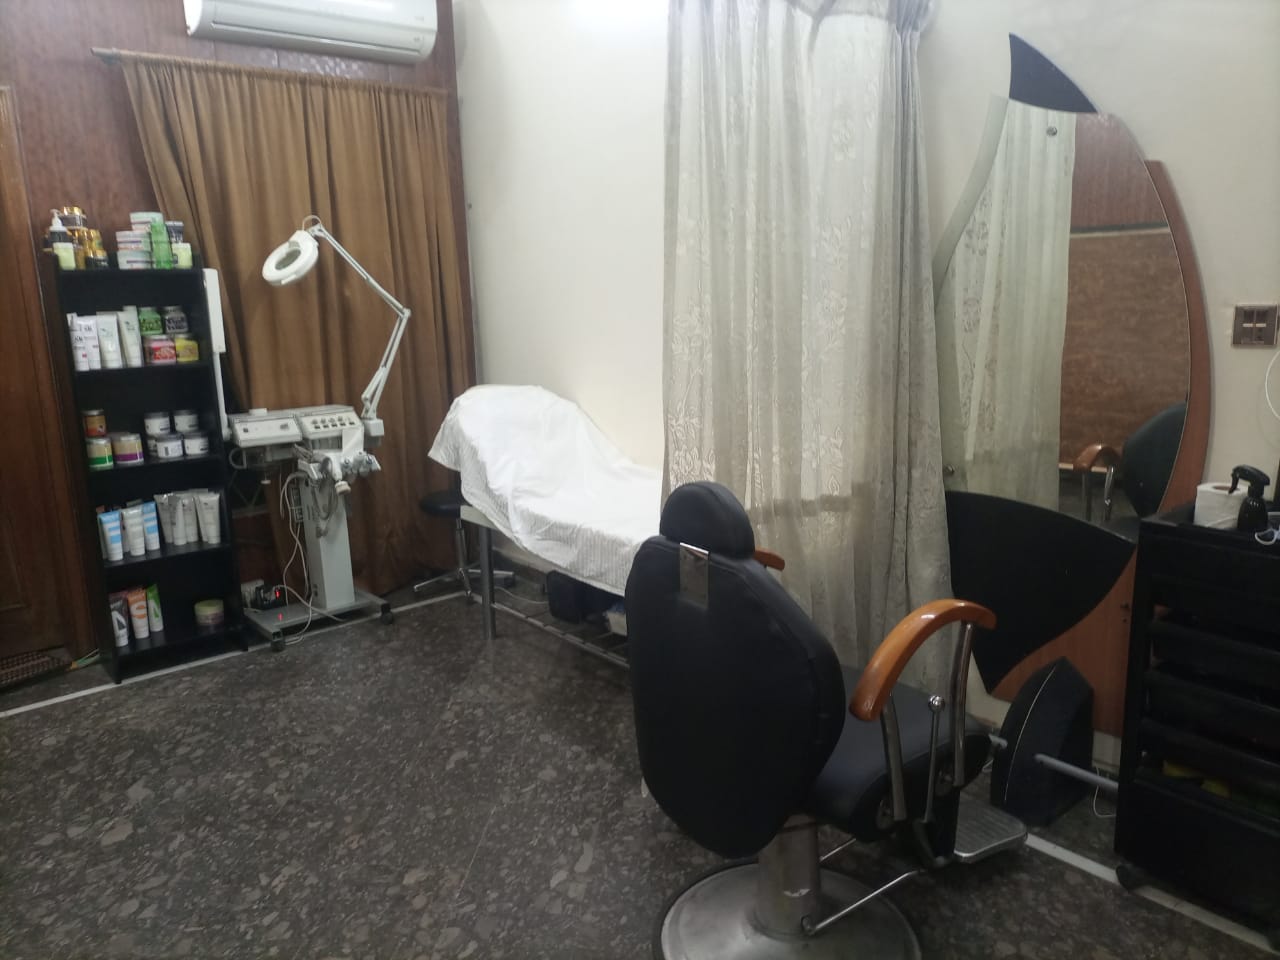 44% off Rs 6999 only for Keratin Treatment (Short Length) + Hair Cut with Blowdry + Shoulder Massage + Eyebrows & Upper lips by Mirrors Beauty Lounge, Wapda town, Lahore.